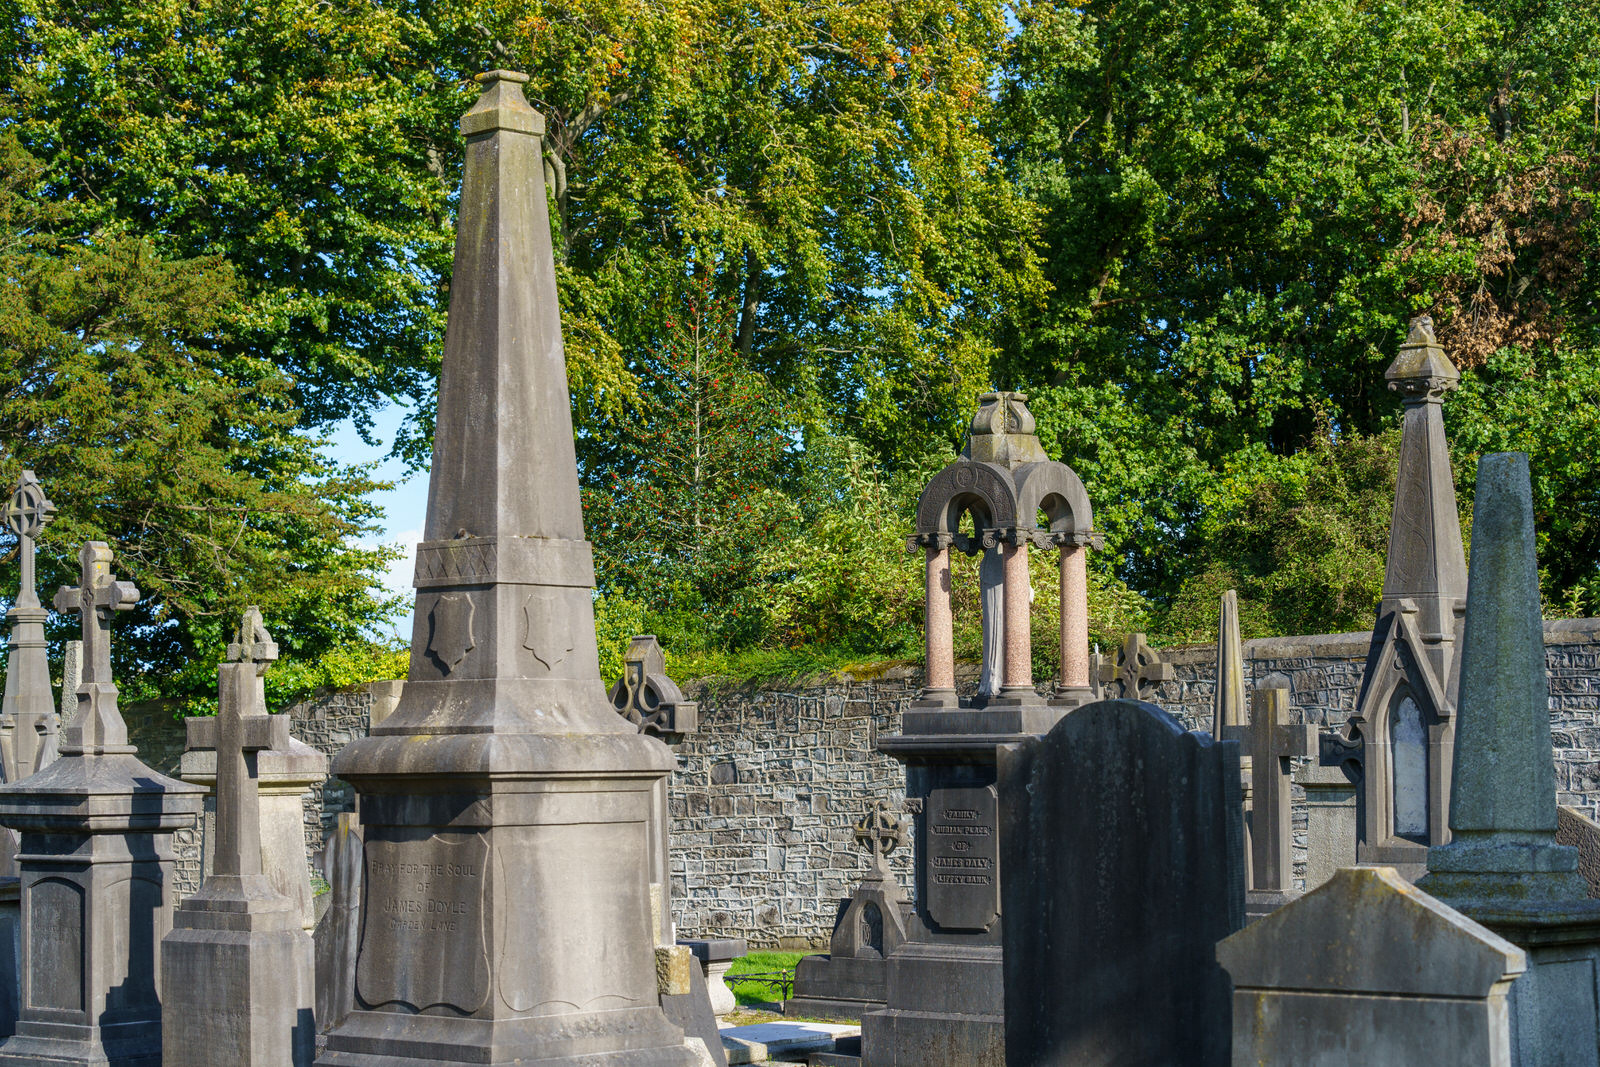 THE OLDER SECTION OF GLASNEVIN CEMETERY [I USED A SONY 70-200MM GM LENS] 009